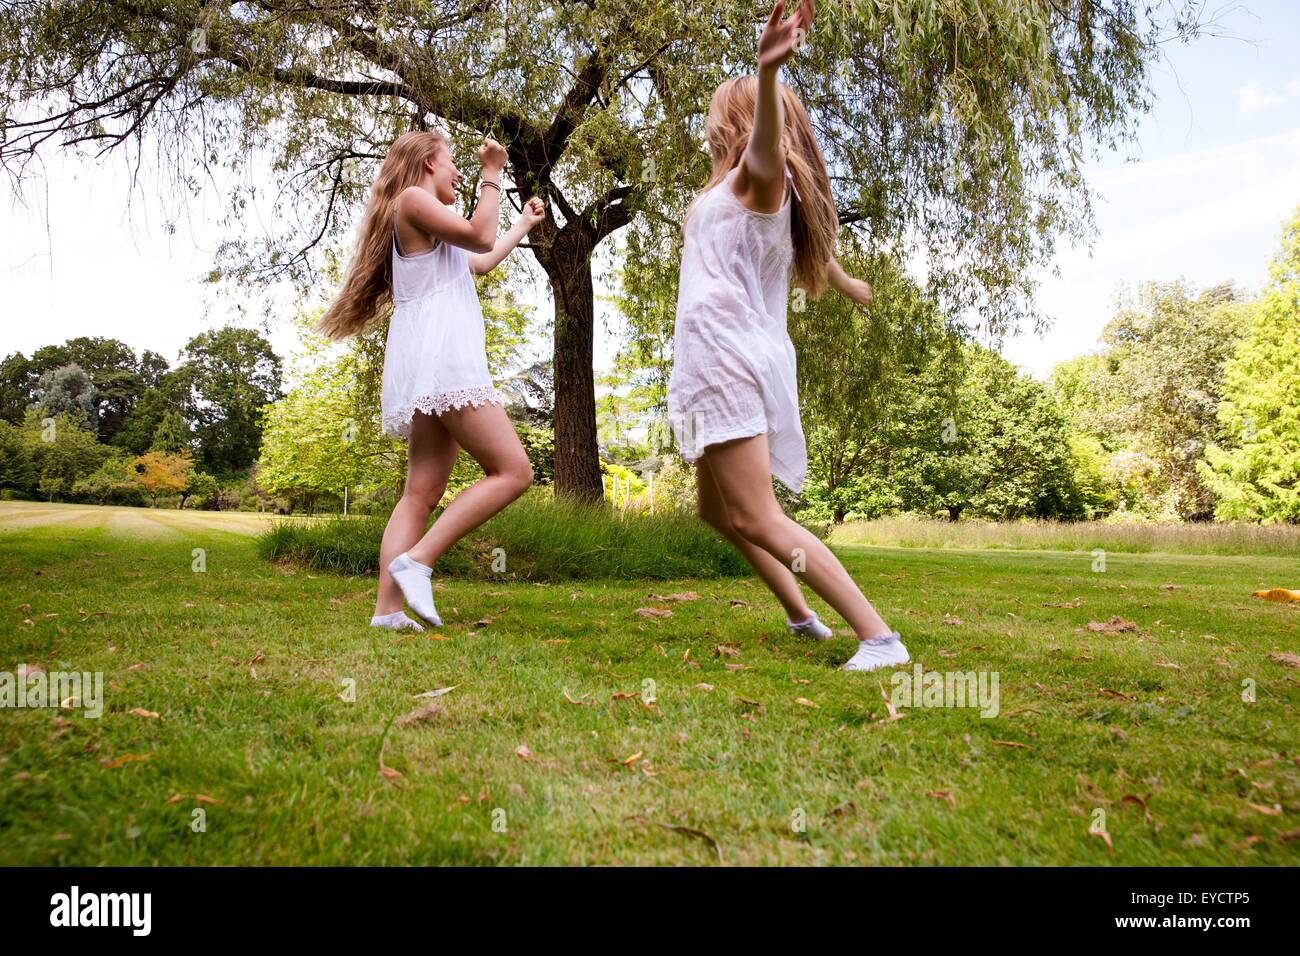 Two teenage girls dancing in field, low angle view Stock Photo